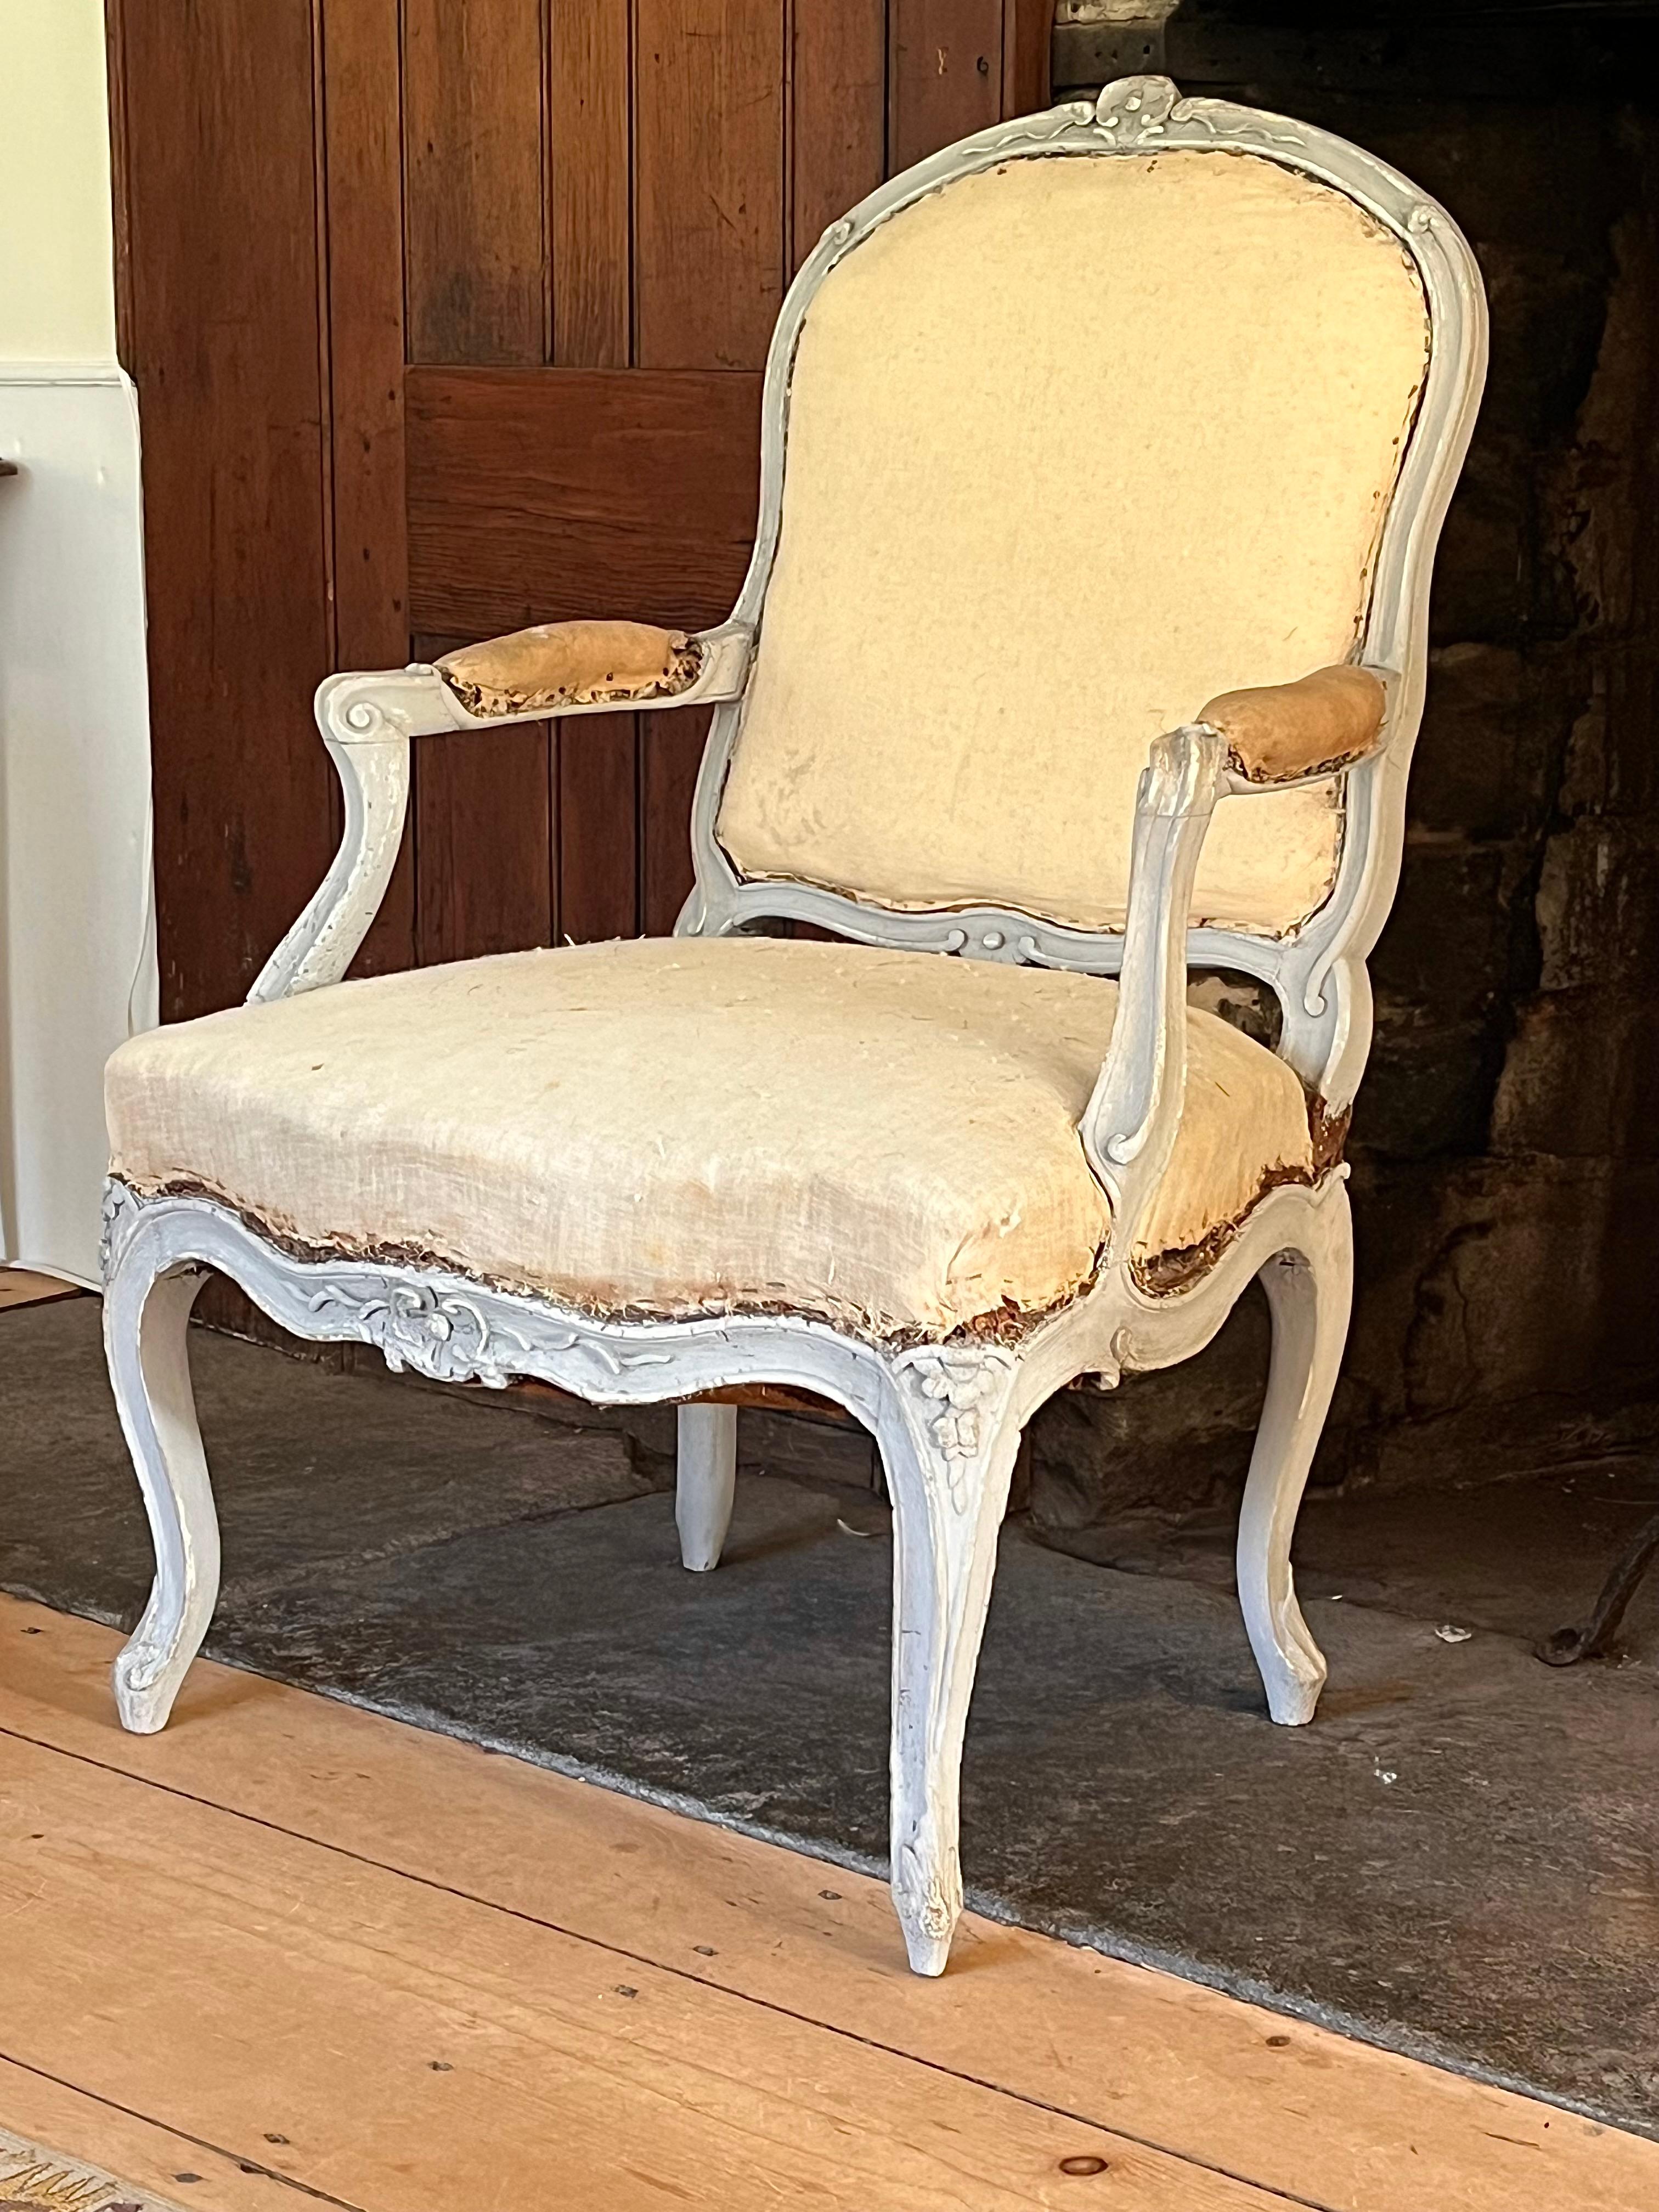 A French 18th century fauteuil a la reine, Louis XV period, in distressed grey painted finish, the frame carved with floral motifs, acanthus leaves at feet. Upholstered seat, back and arms. Nice scale and quality. 